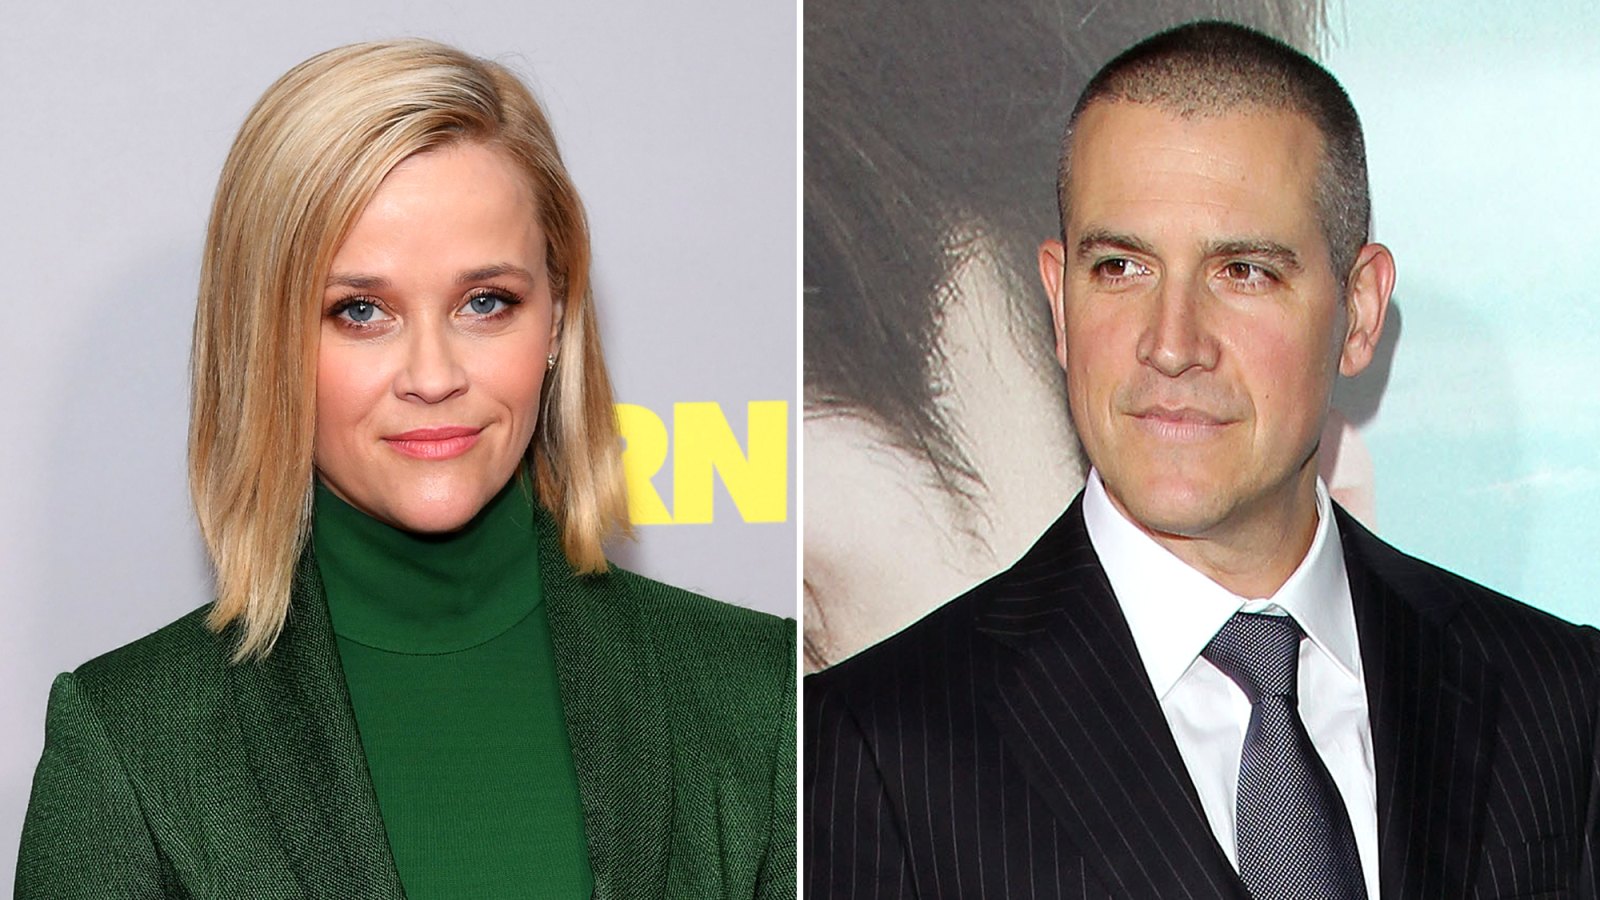 Reese Witherspoon Spotted Without Wedding Ring After Announcing Jim Toth Divorce